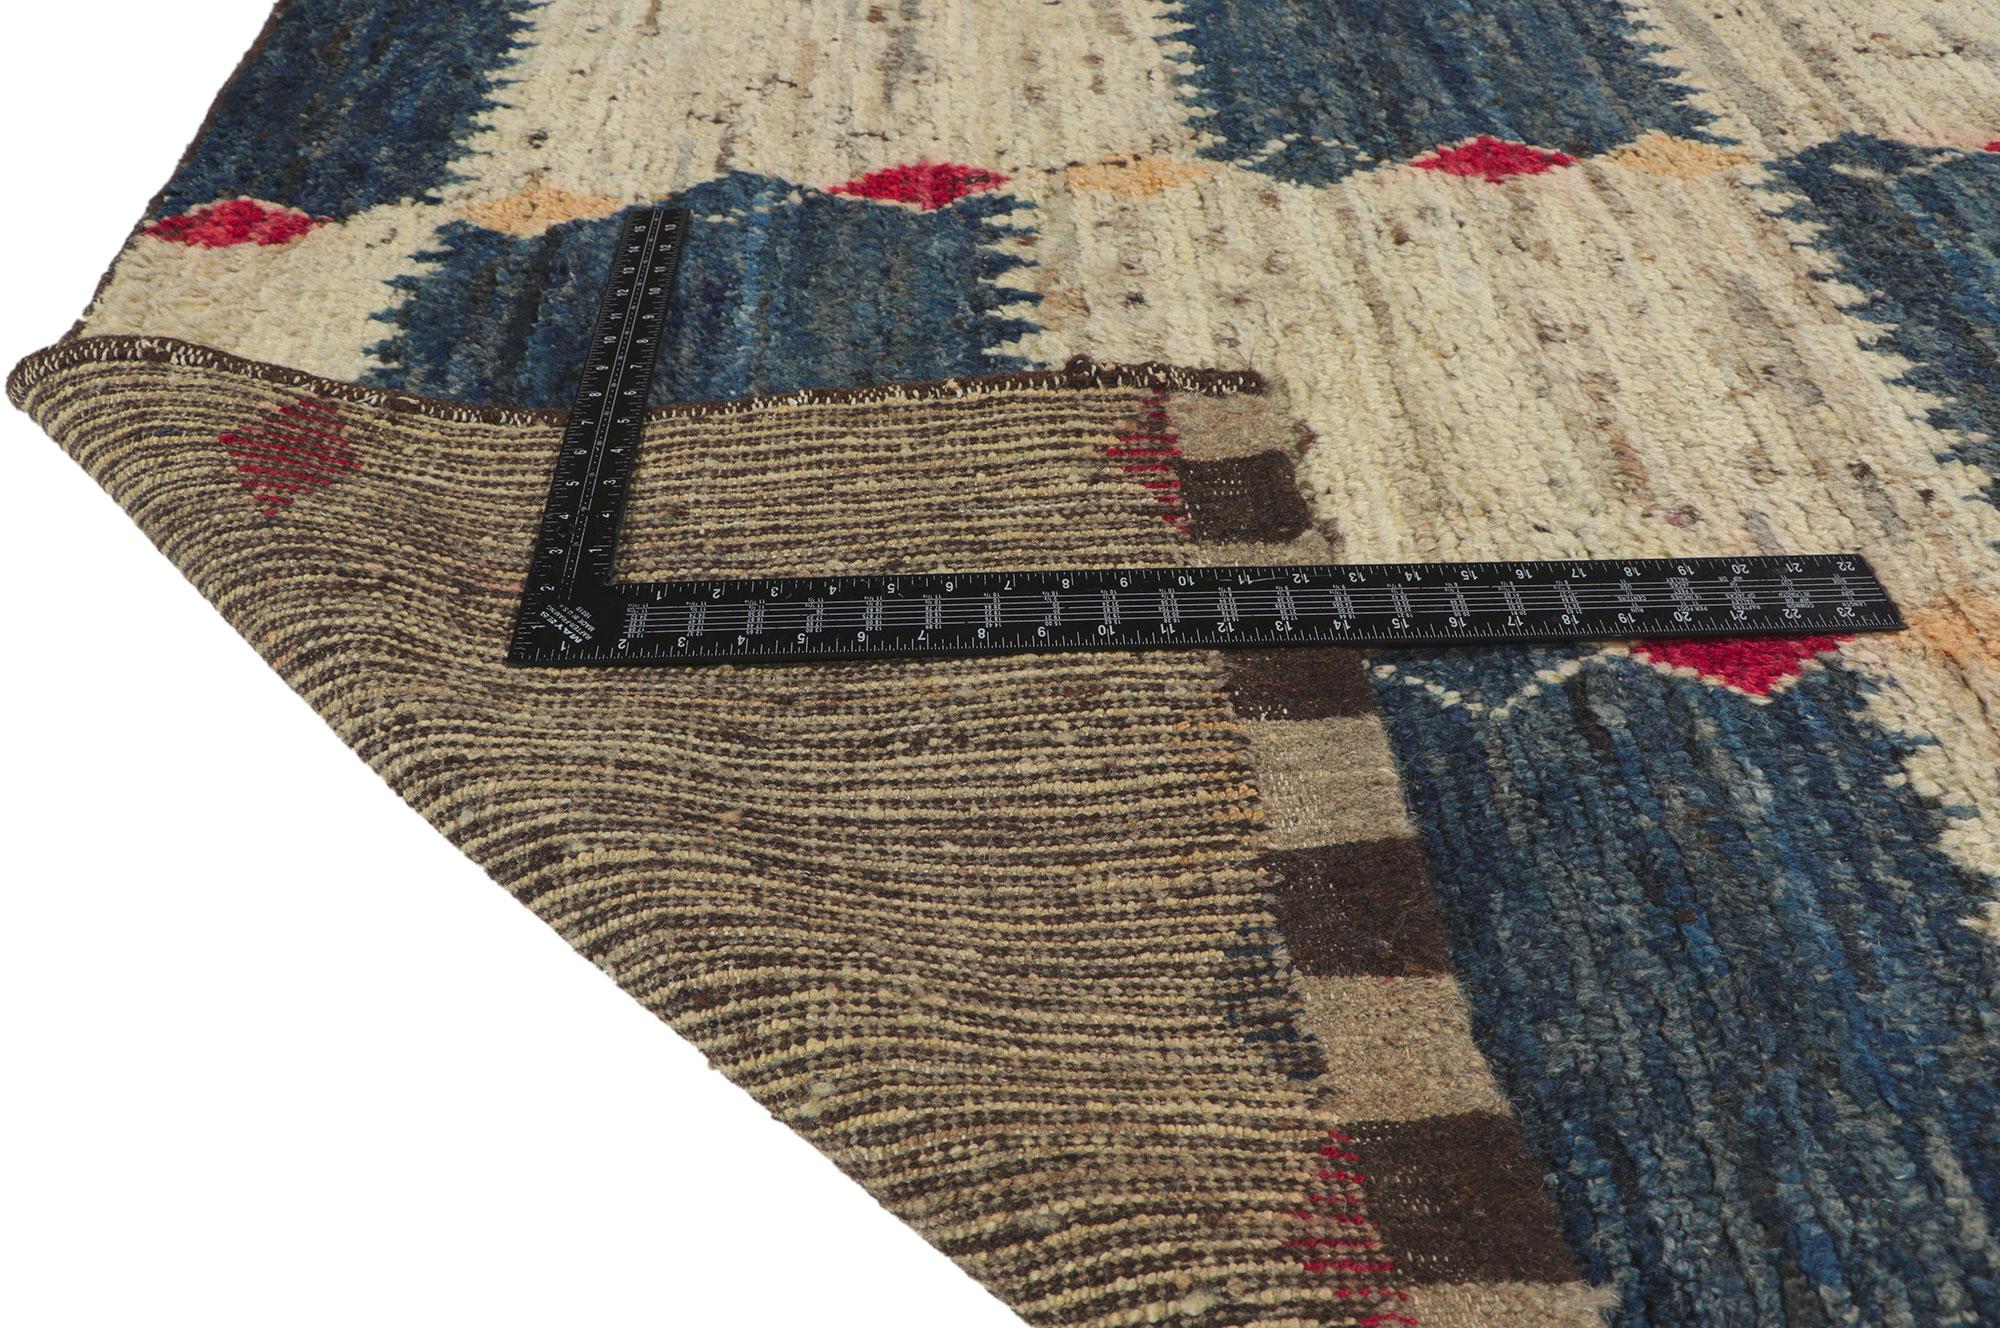 Earth-tone Checkered Moroccan Rug, Midcentury Modern Meets Tribal Enchantment In New Condition For Sale In Dallas, TX